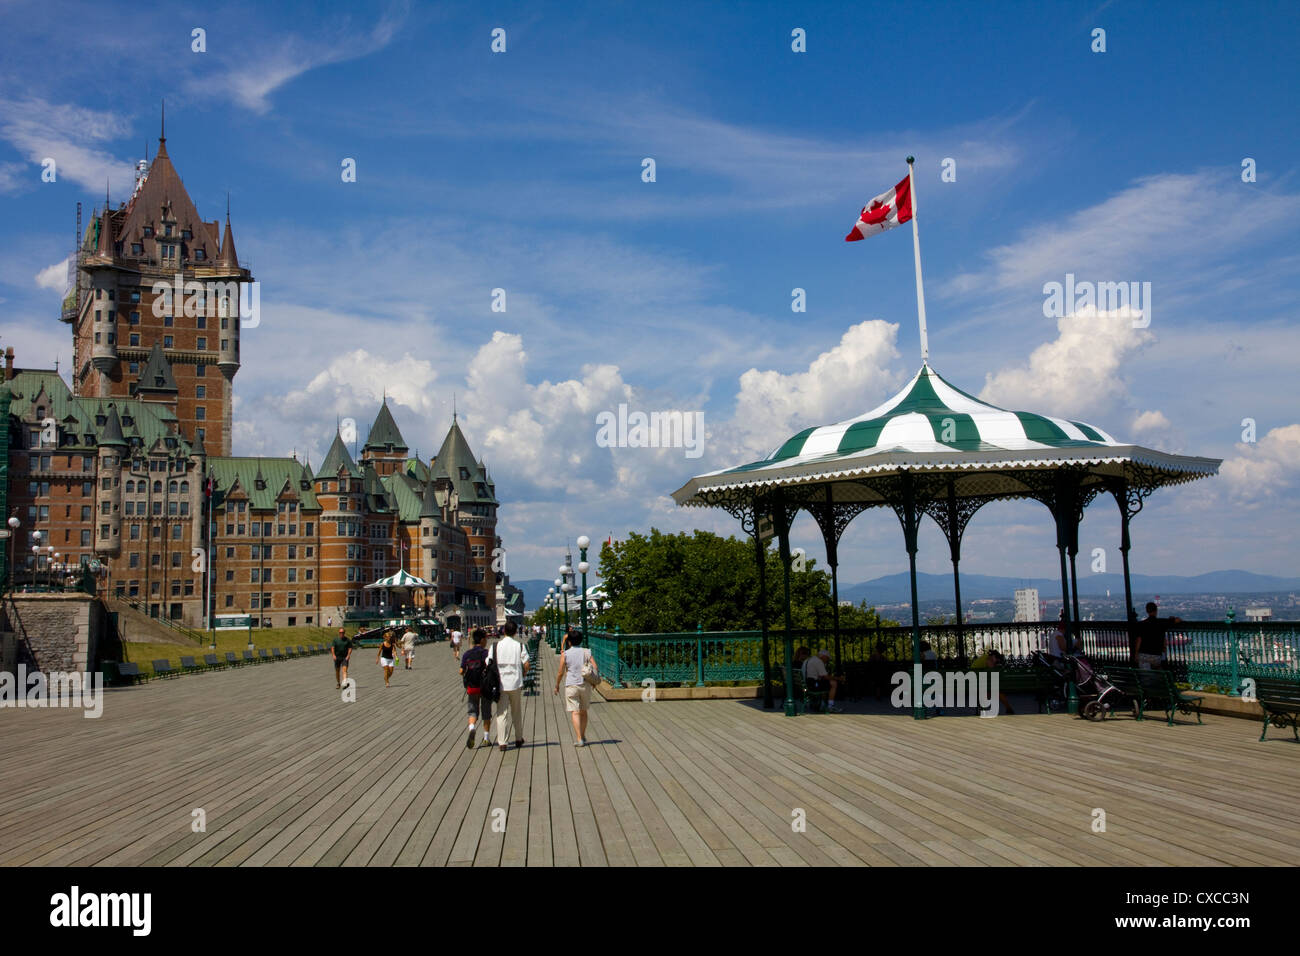 Fairmont Le Chateaux Frontenac, from Dufferin Terrace overlooking the St. Lawrence River, Quebec City, Canada Stock Photo